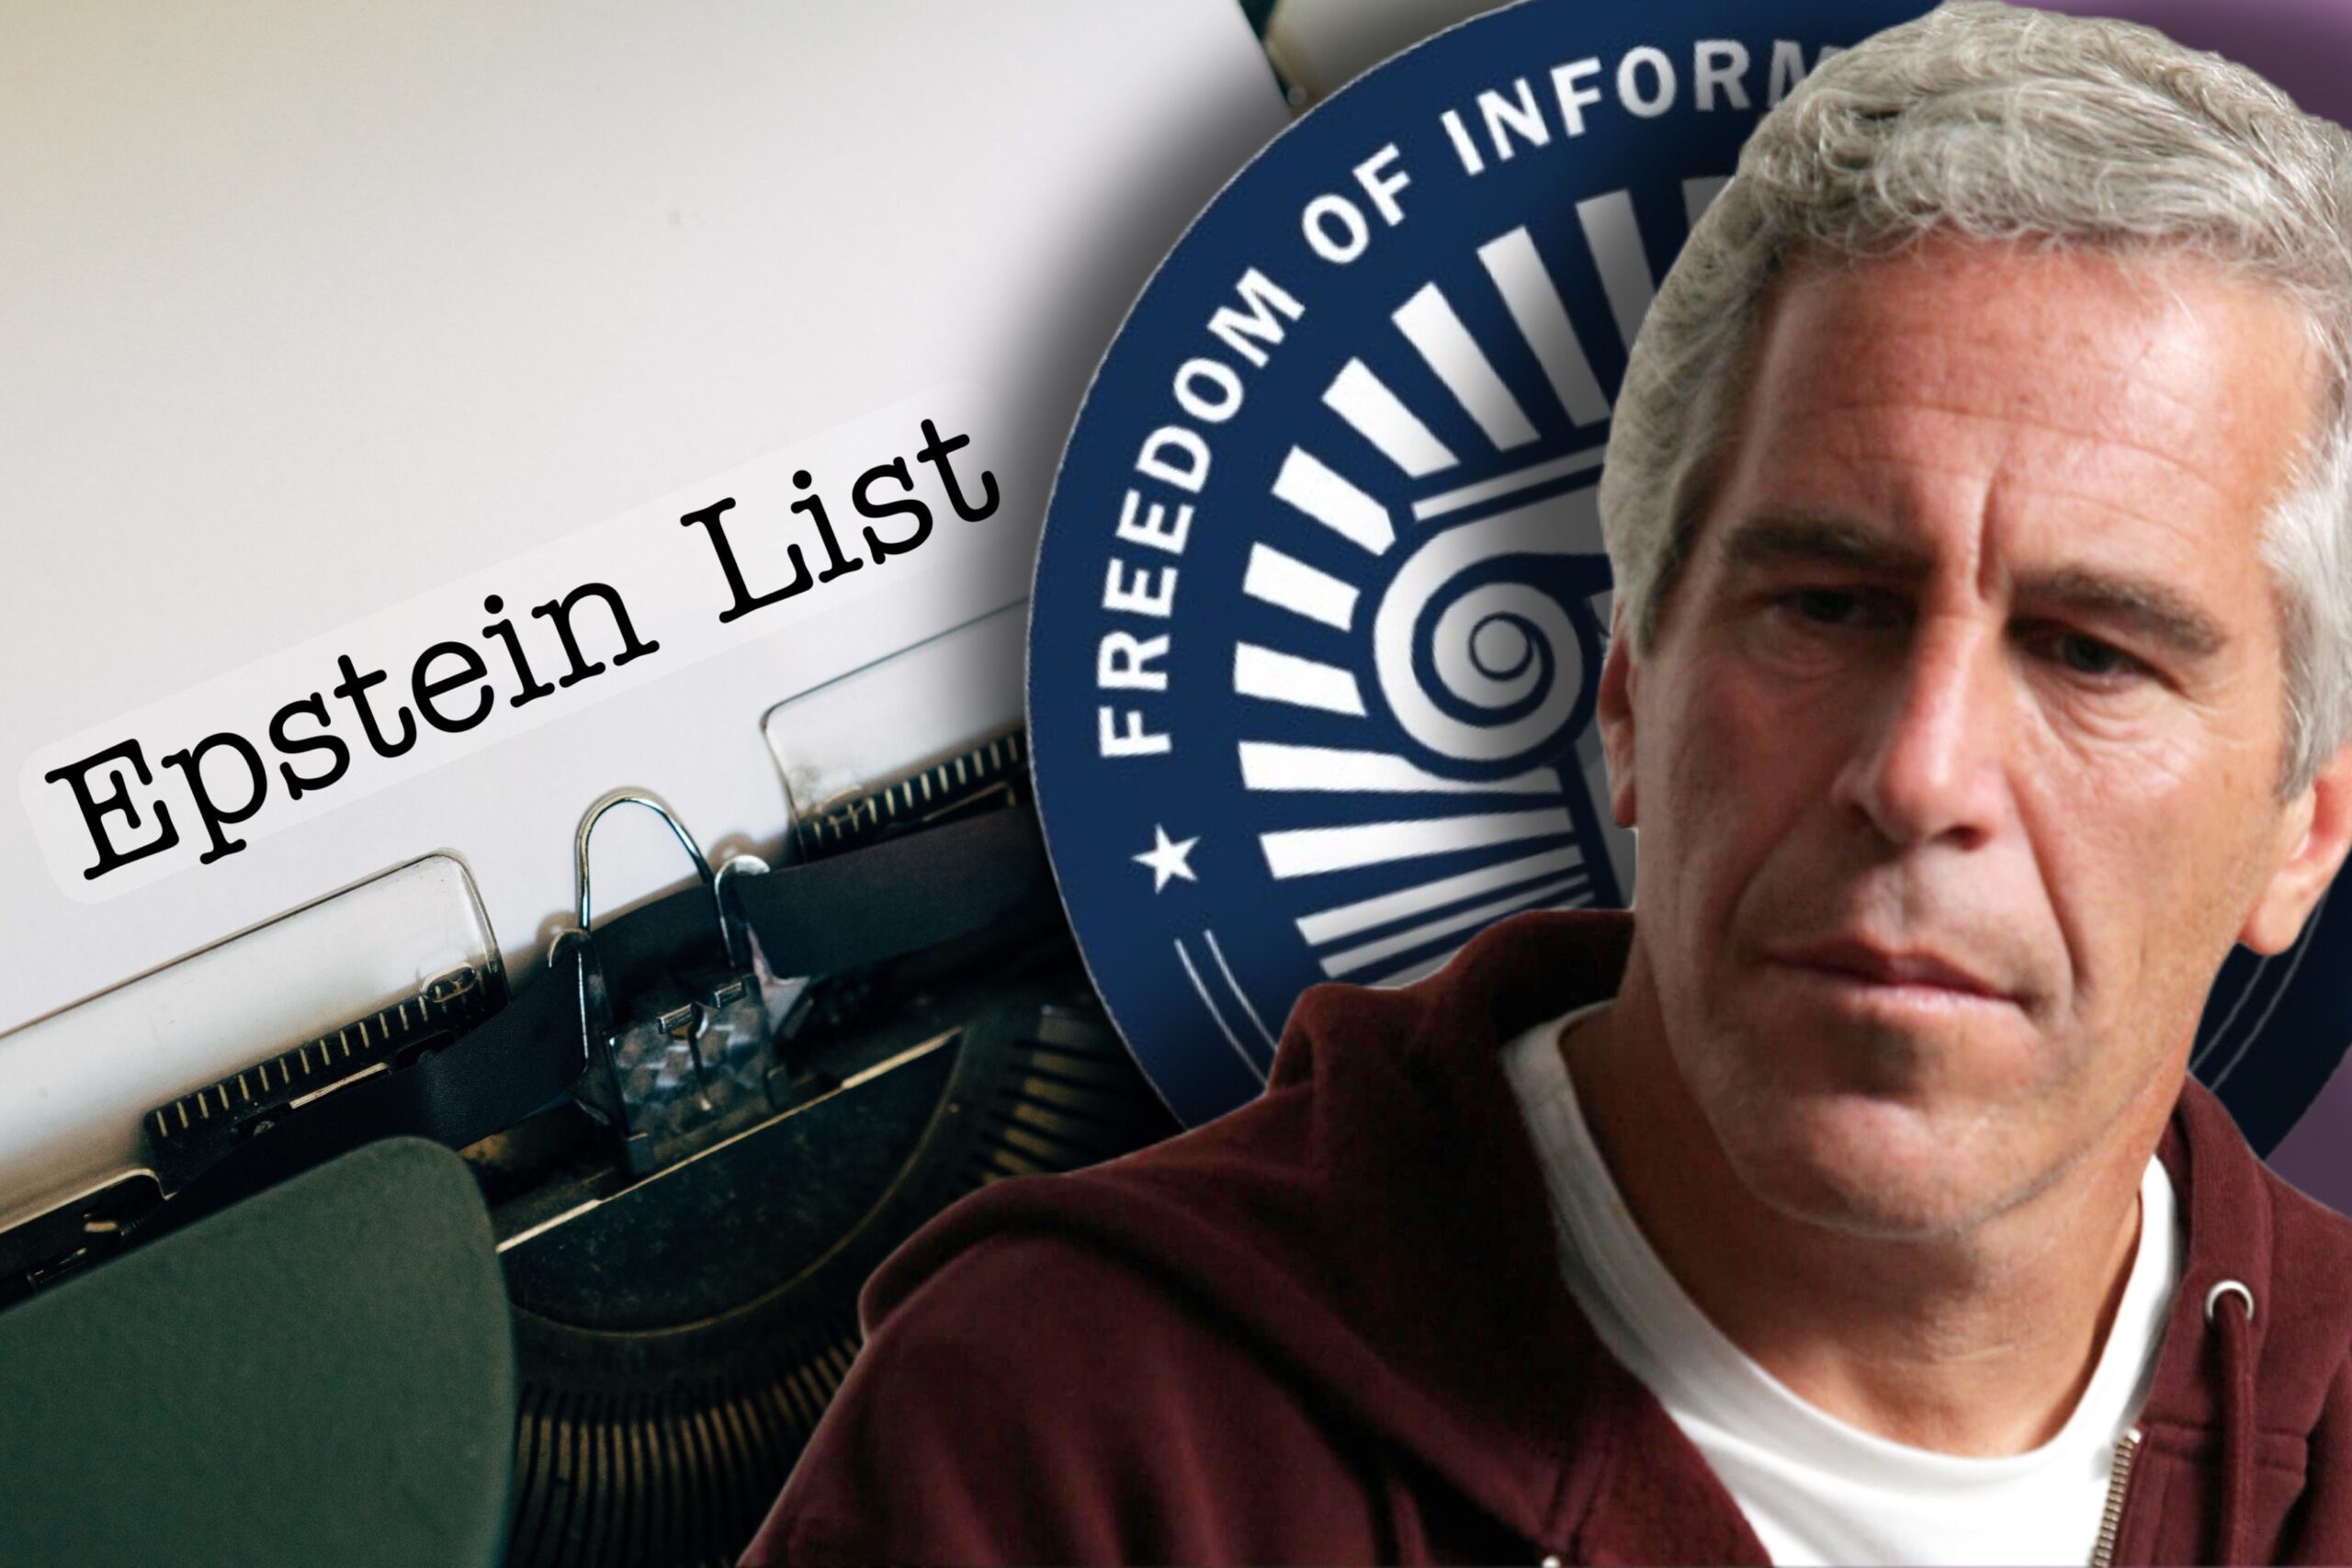 WHOA: Private Calendar Reveals Convicted Pedophile Jeffrey Epstein met with Biden’s CIA Spy chief and Other Leftist Individuals AFTER Sex Crimes Conviction